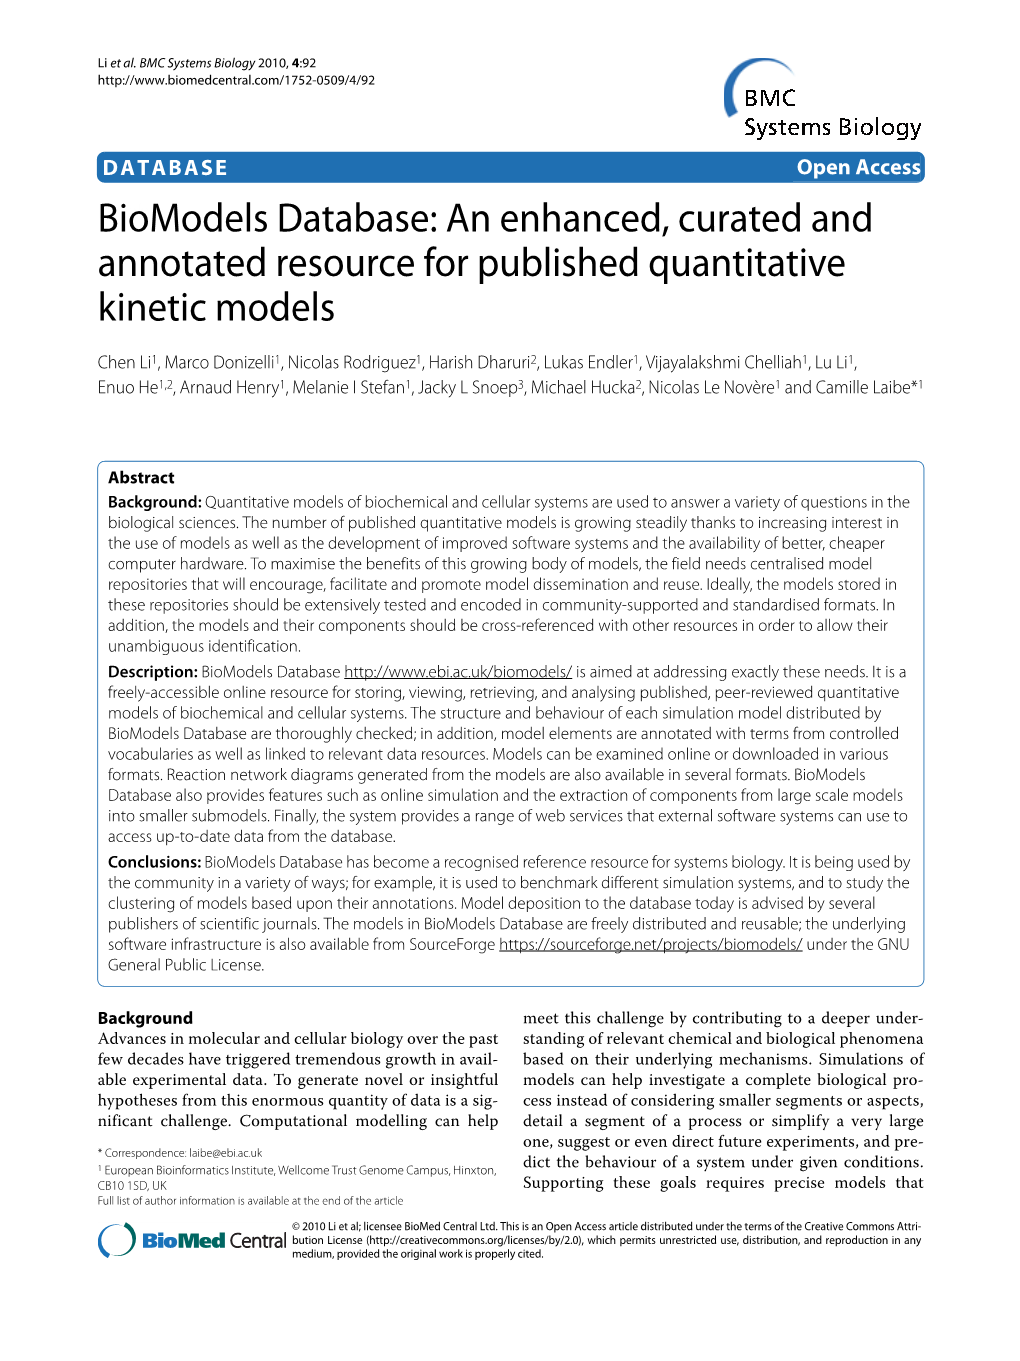 Biomodels Database: an Enhanced, Curated and Annotated Resource for Published Quantitative Kinetic Models BMC Systems Biology 2010, 4:92